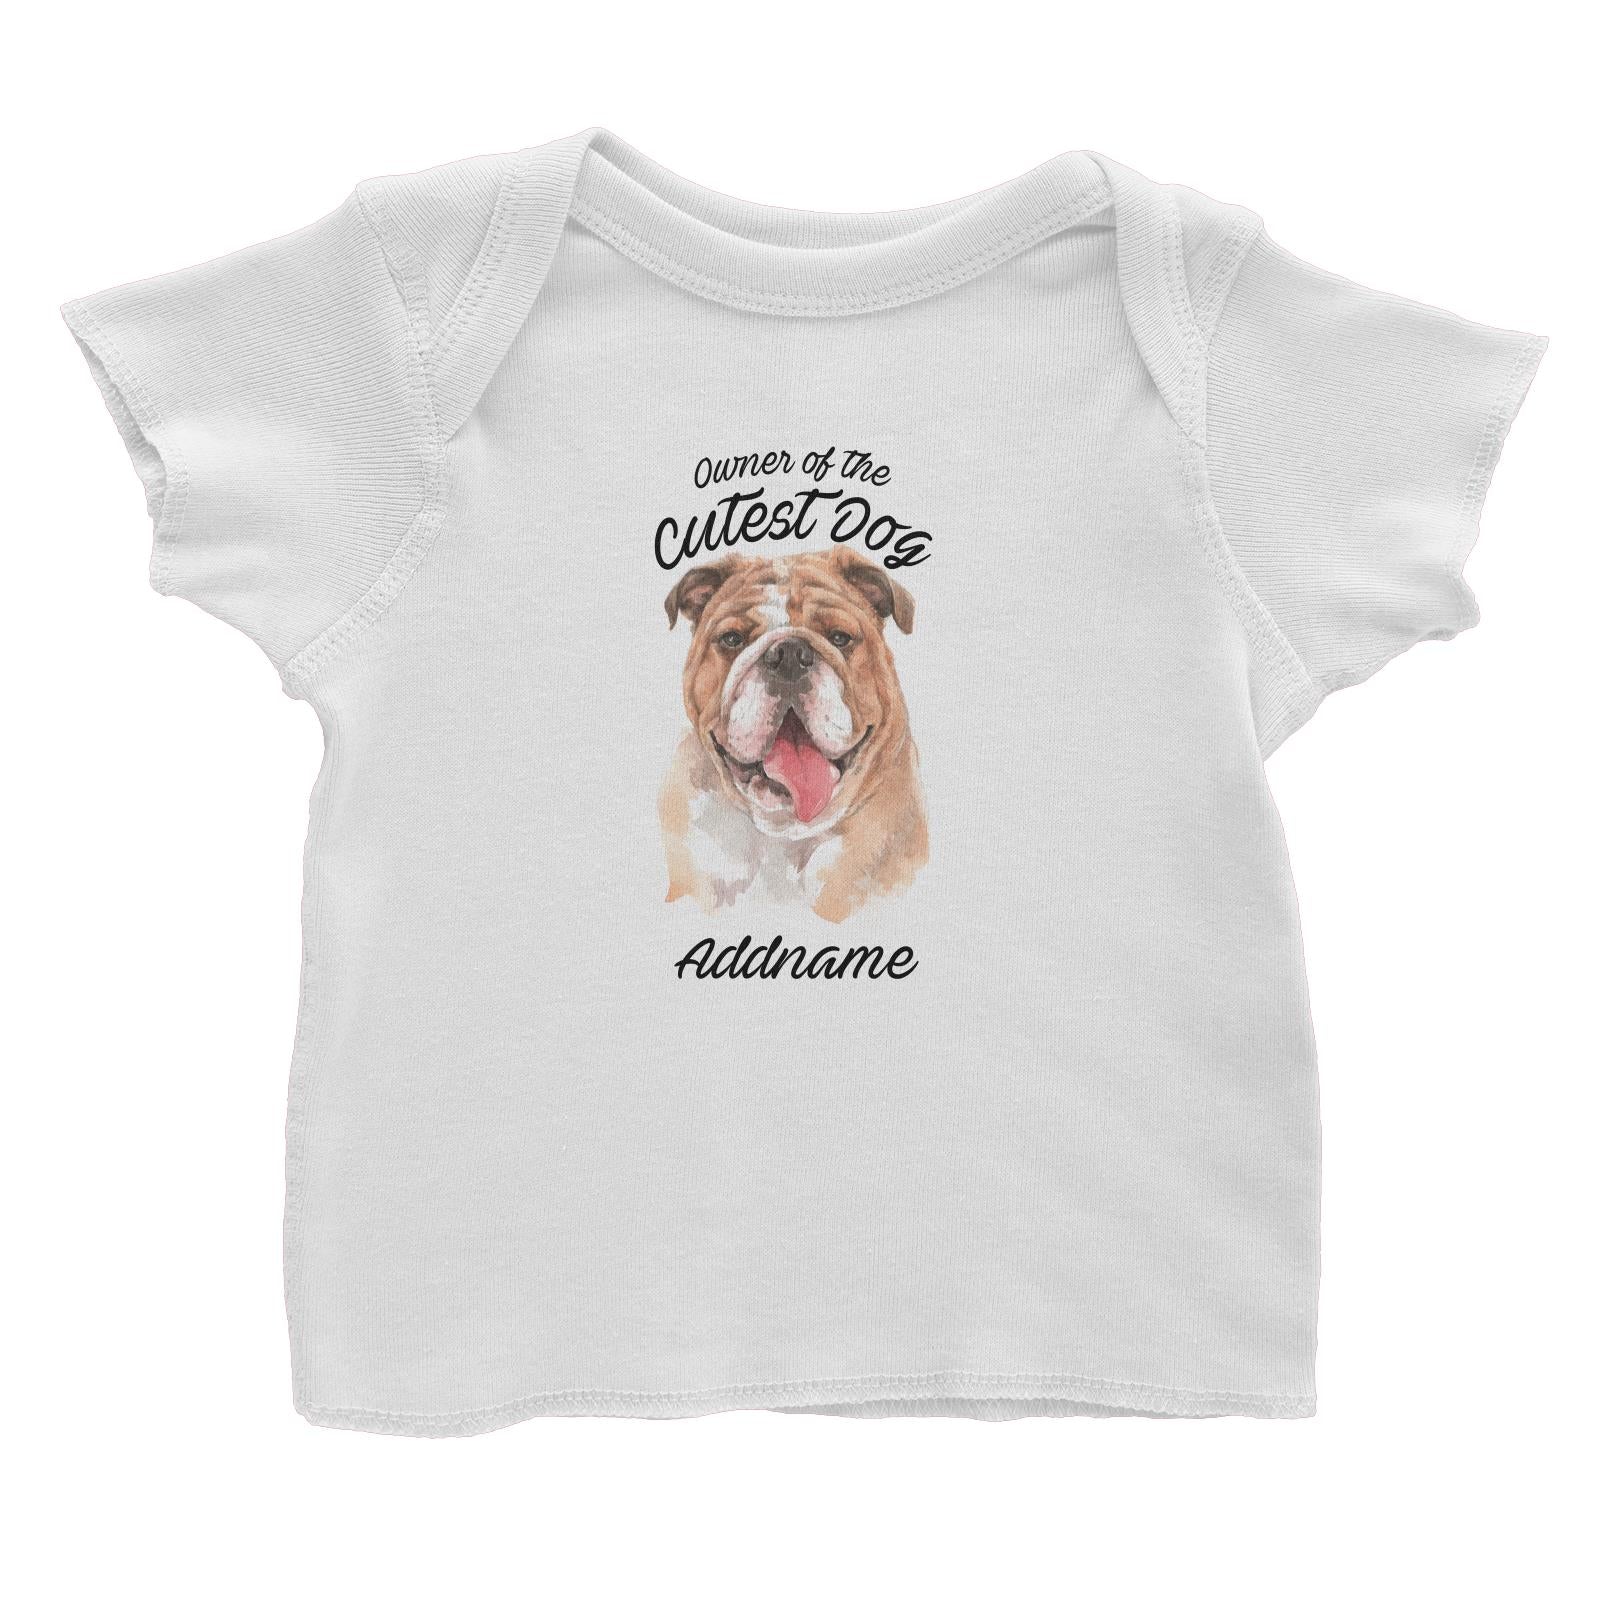 Watercolor Dog Owner Of The Cutest Dog Bulldog Addname Baby T-Shirt